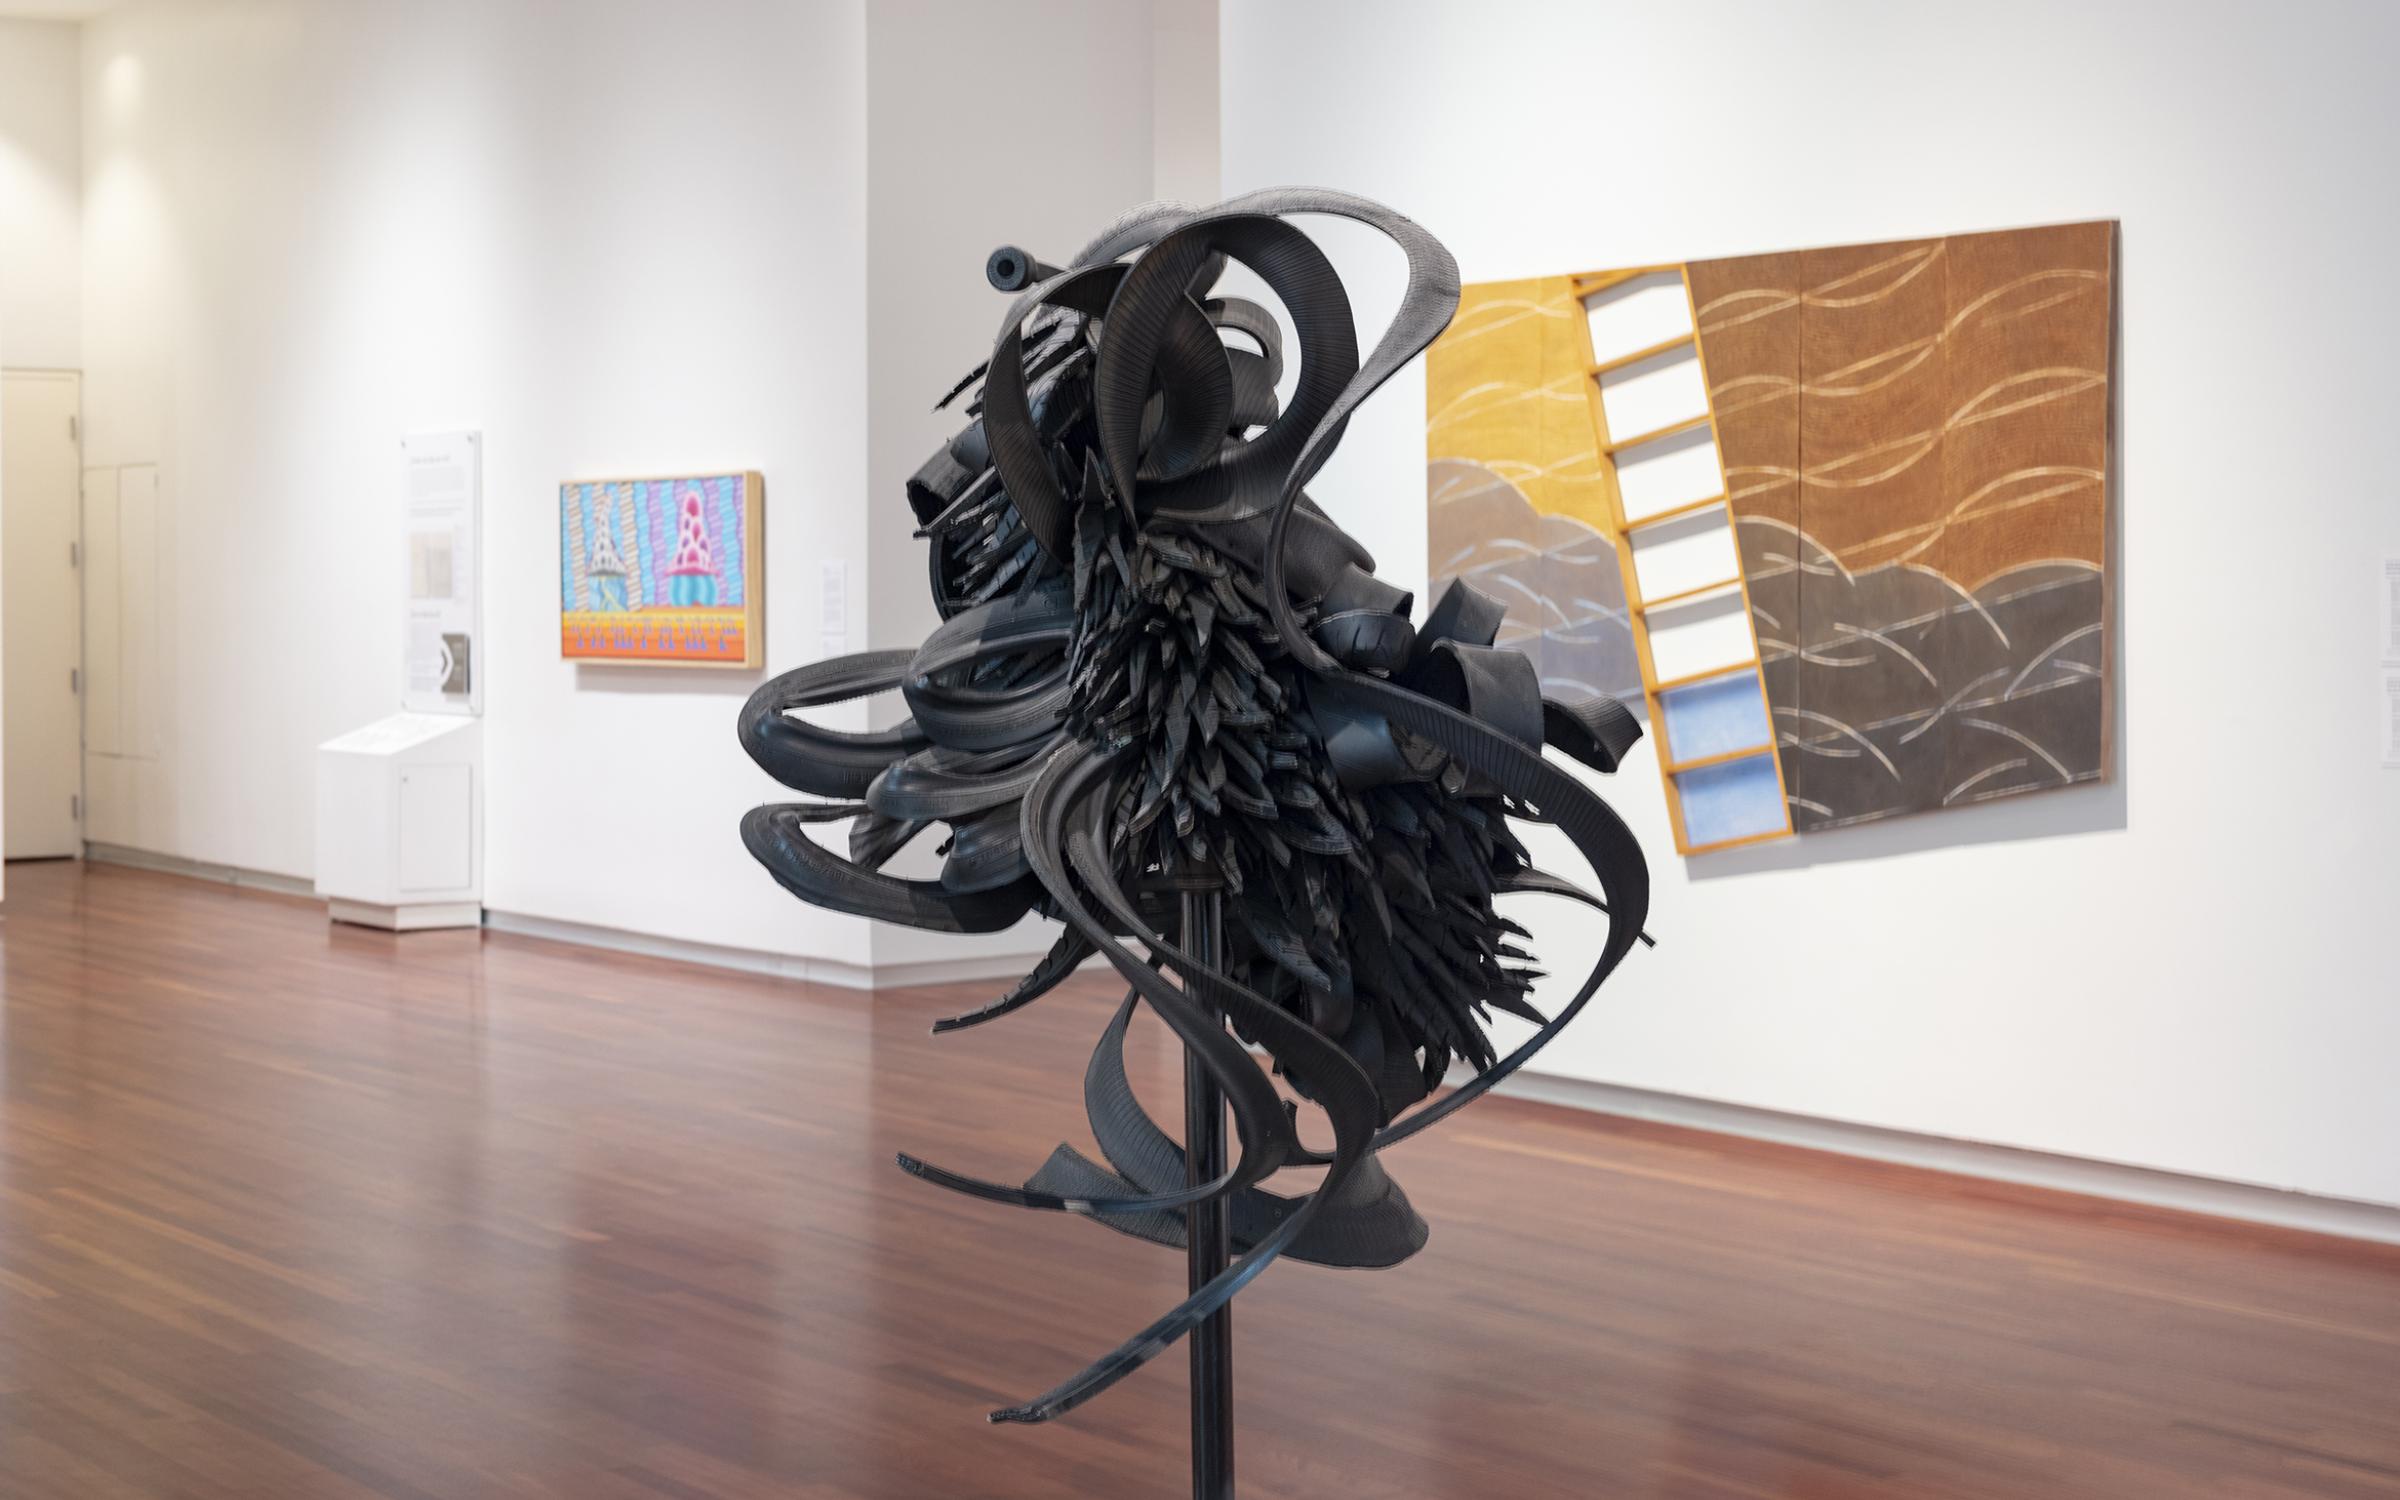 A sculpture made of shreds of car tires stands in the middle of a large gallery room. There are colorful paintings hung on the white walls in the background.